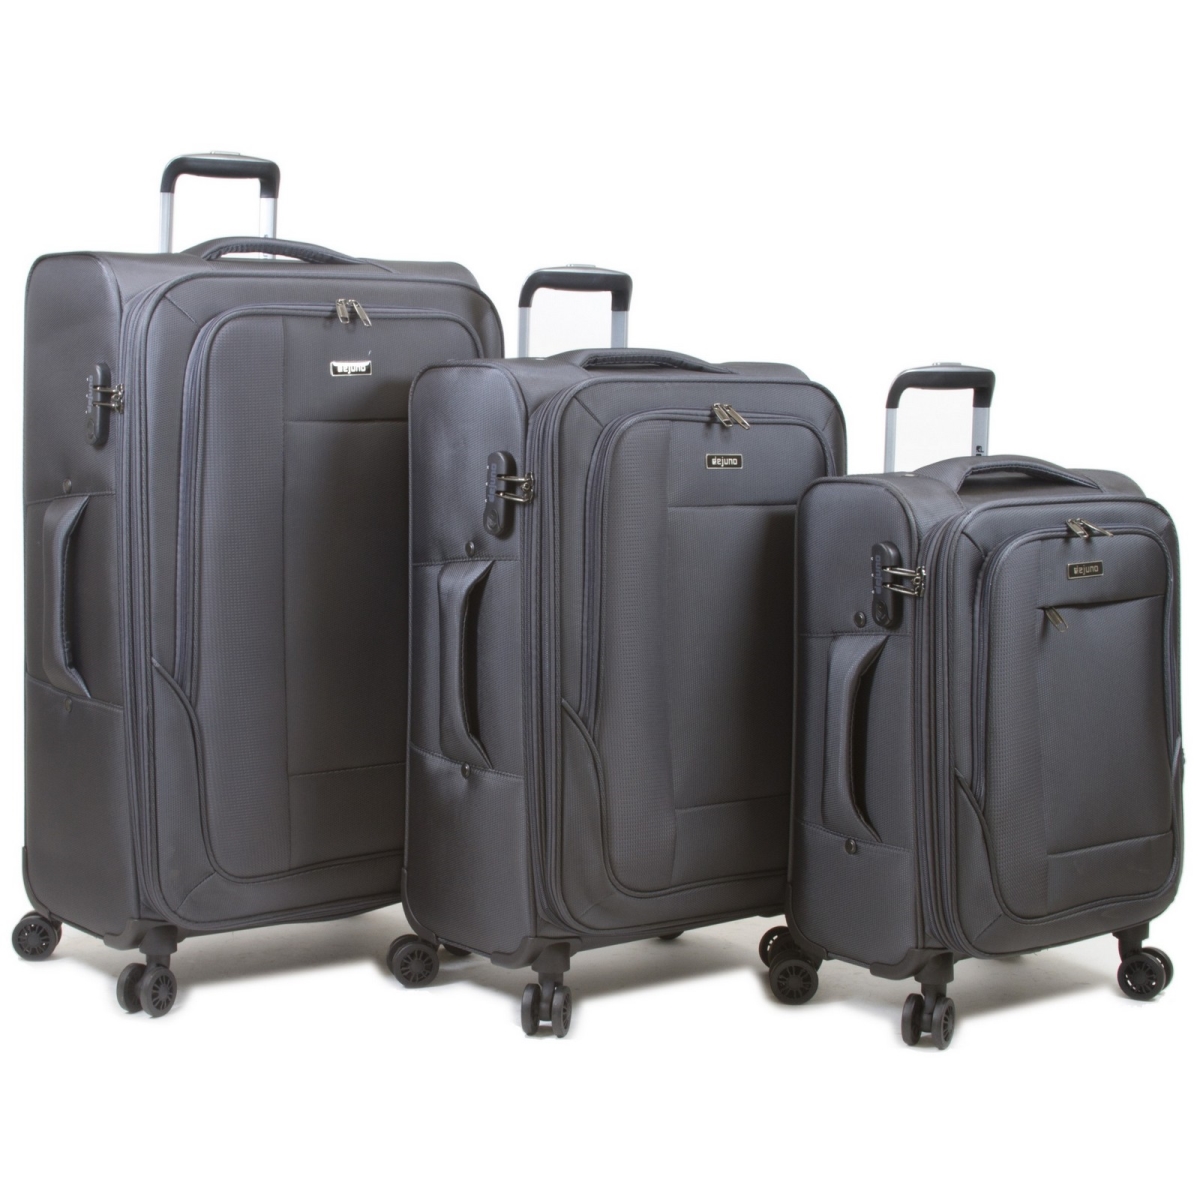 Picture of Dejuno 2002DJ-CHARCOAL Twilight Lightweight Nylon Spinner Luggage Set, Charcoal - 3 Piece